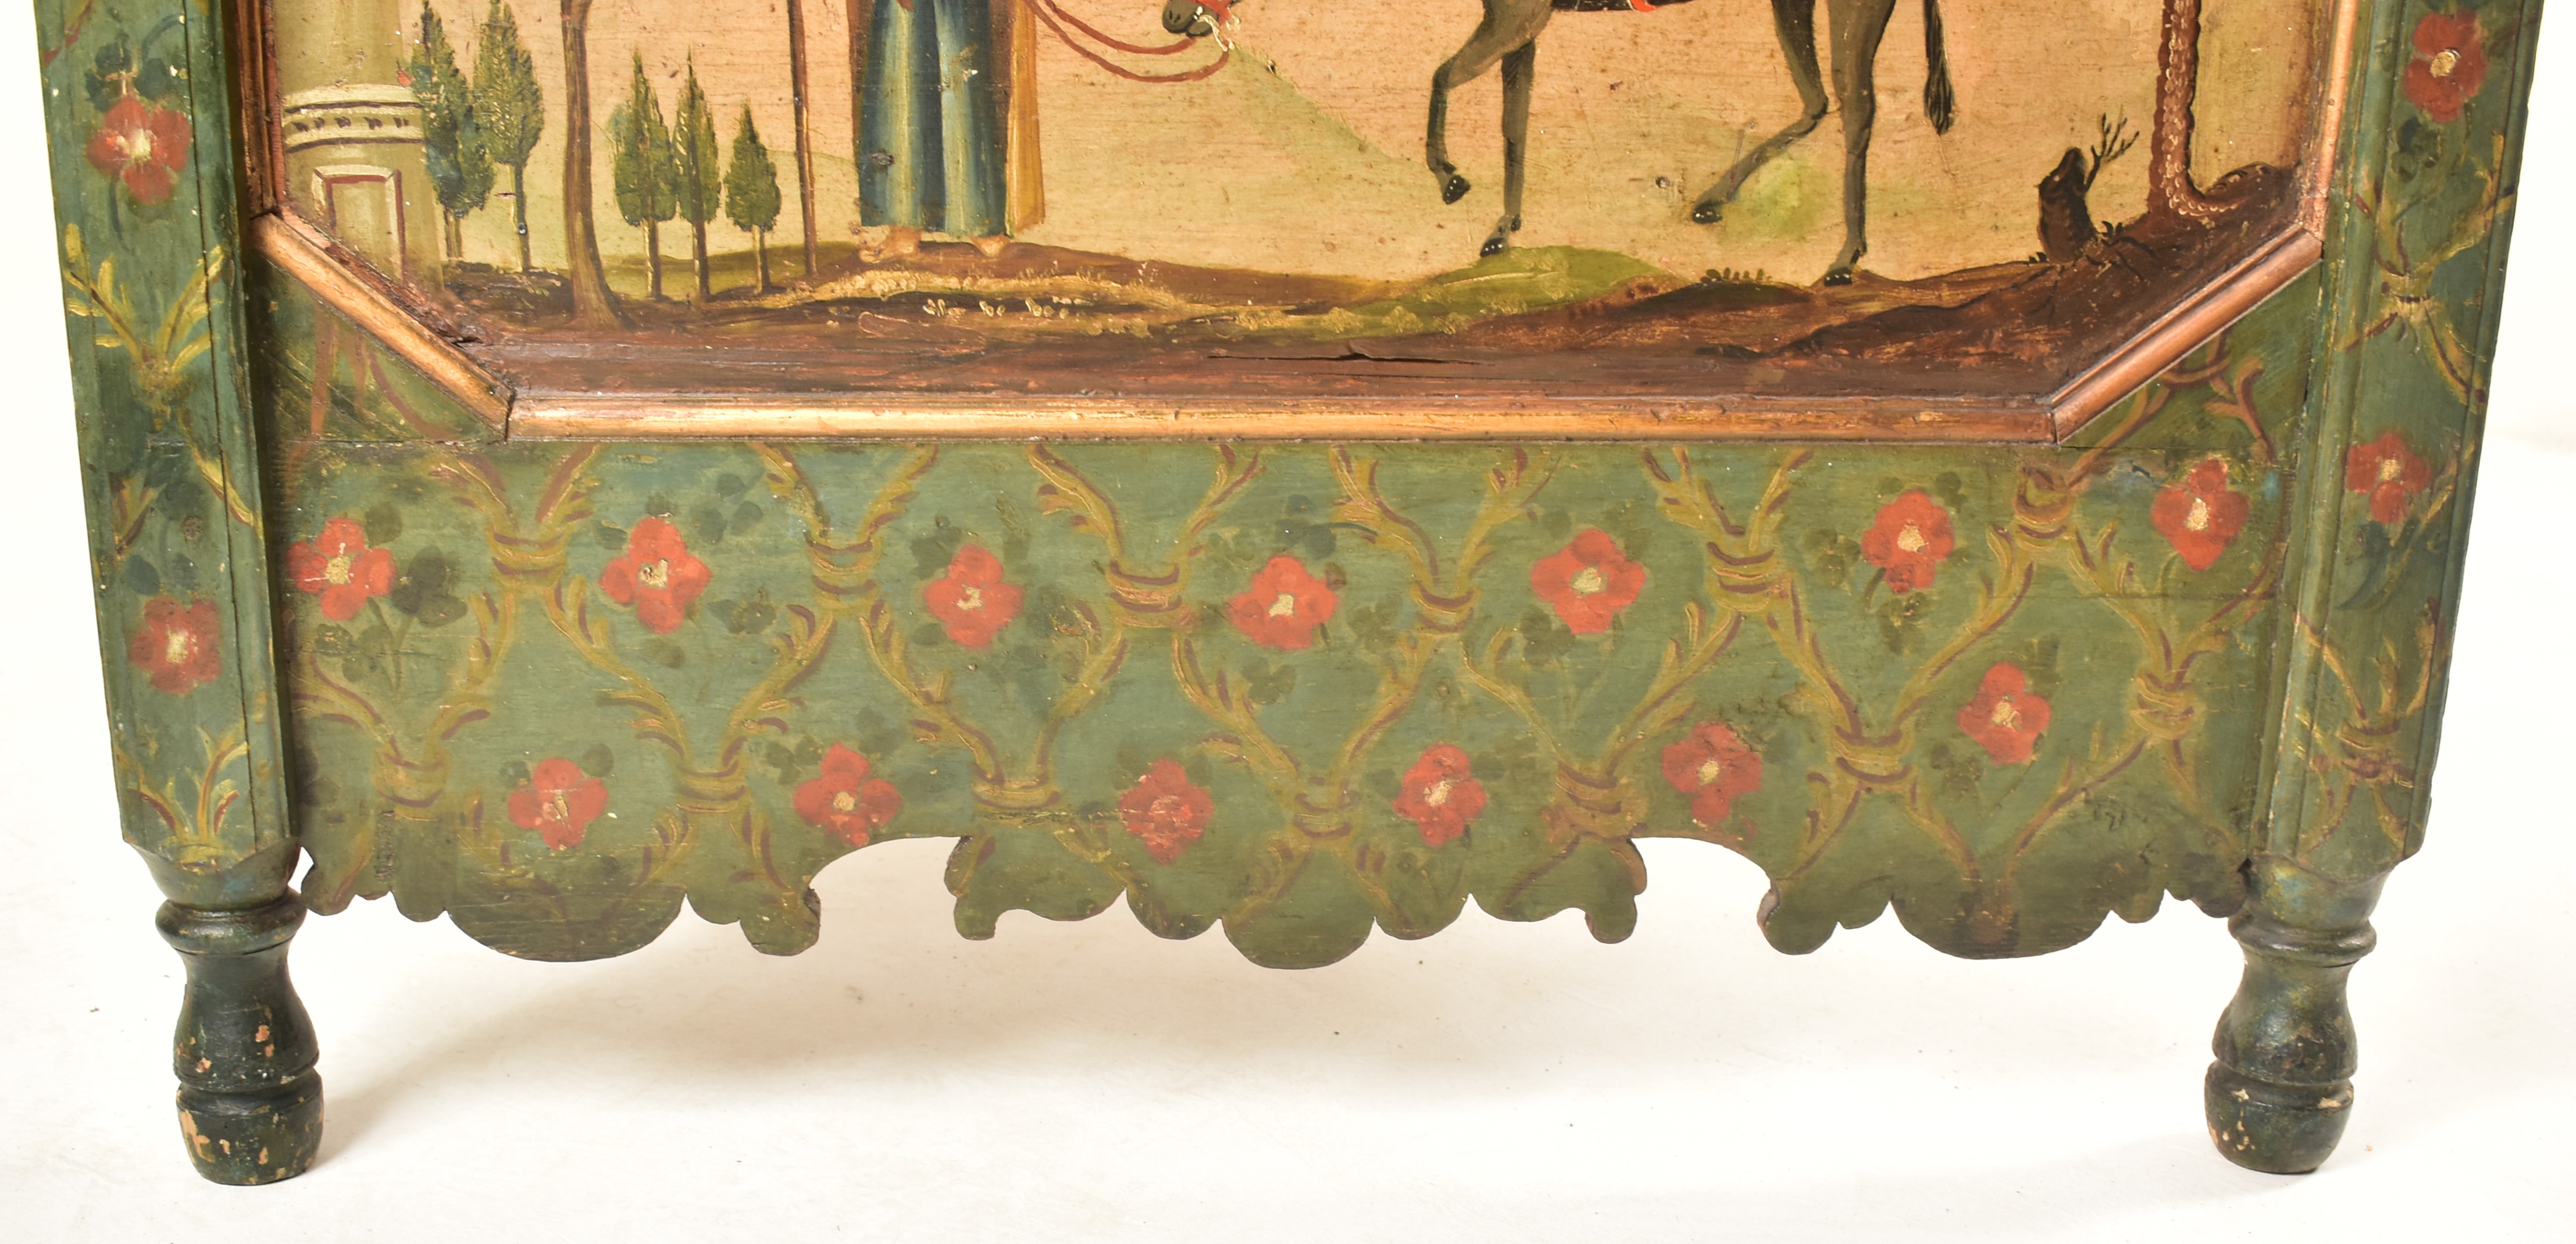 AUSTRIAN 19TH CENTURY HAND PAINTED WOOD RUSTIC FOLK SINGLE BED - Image 5 of 10